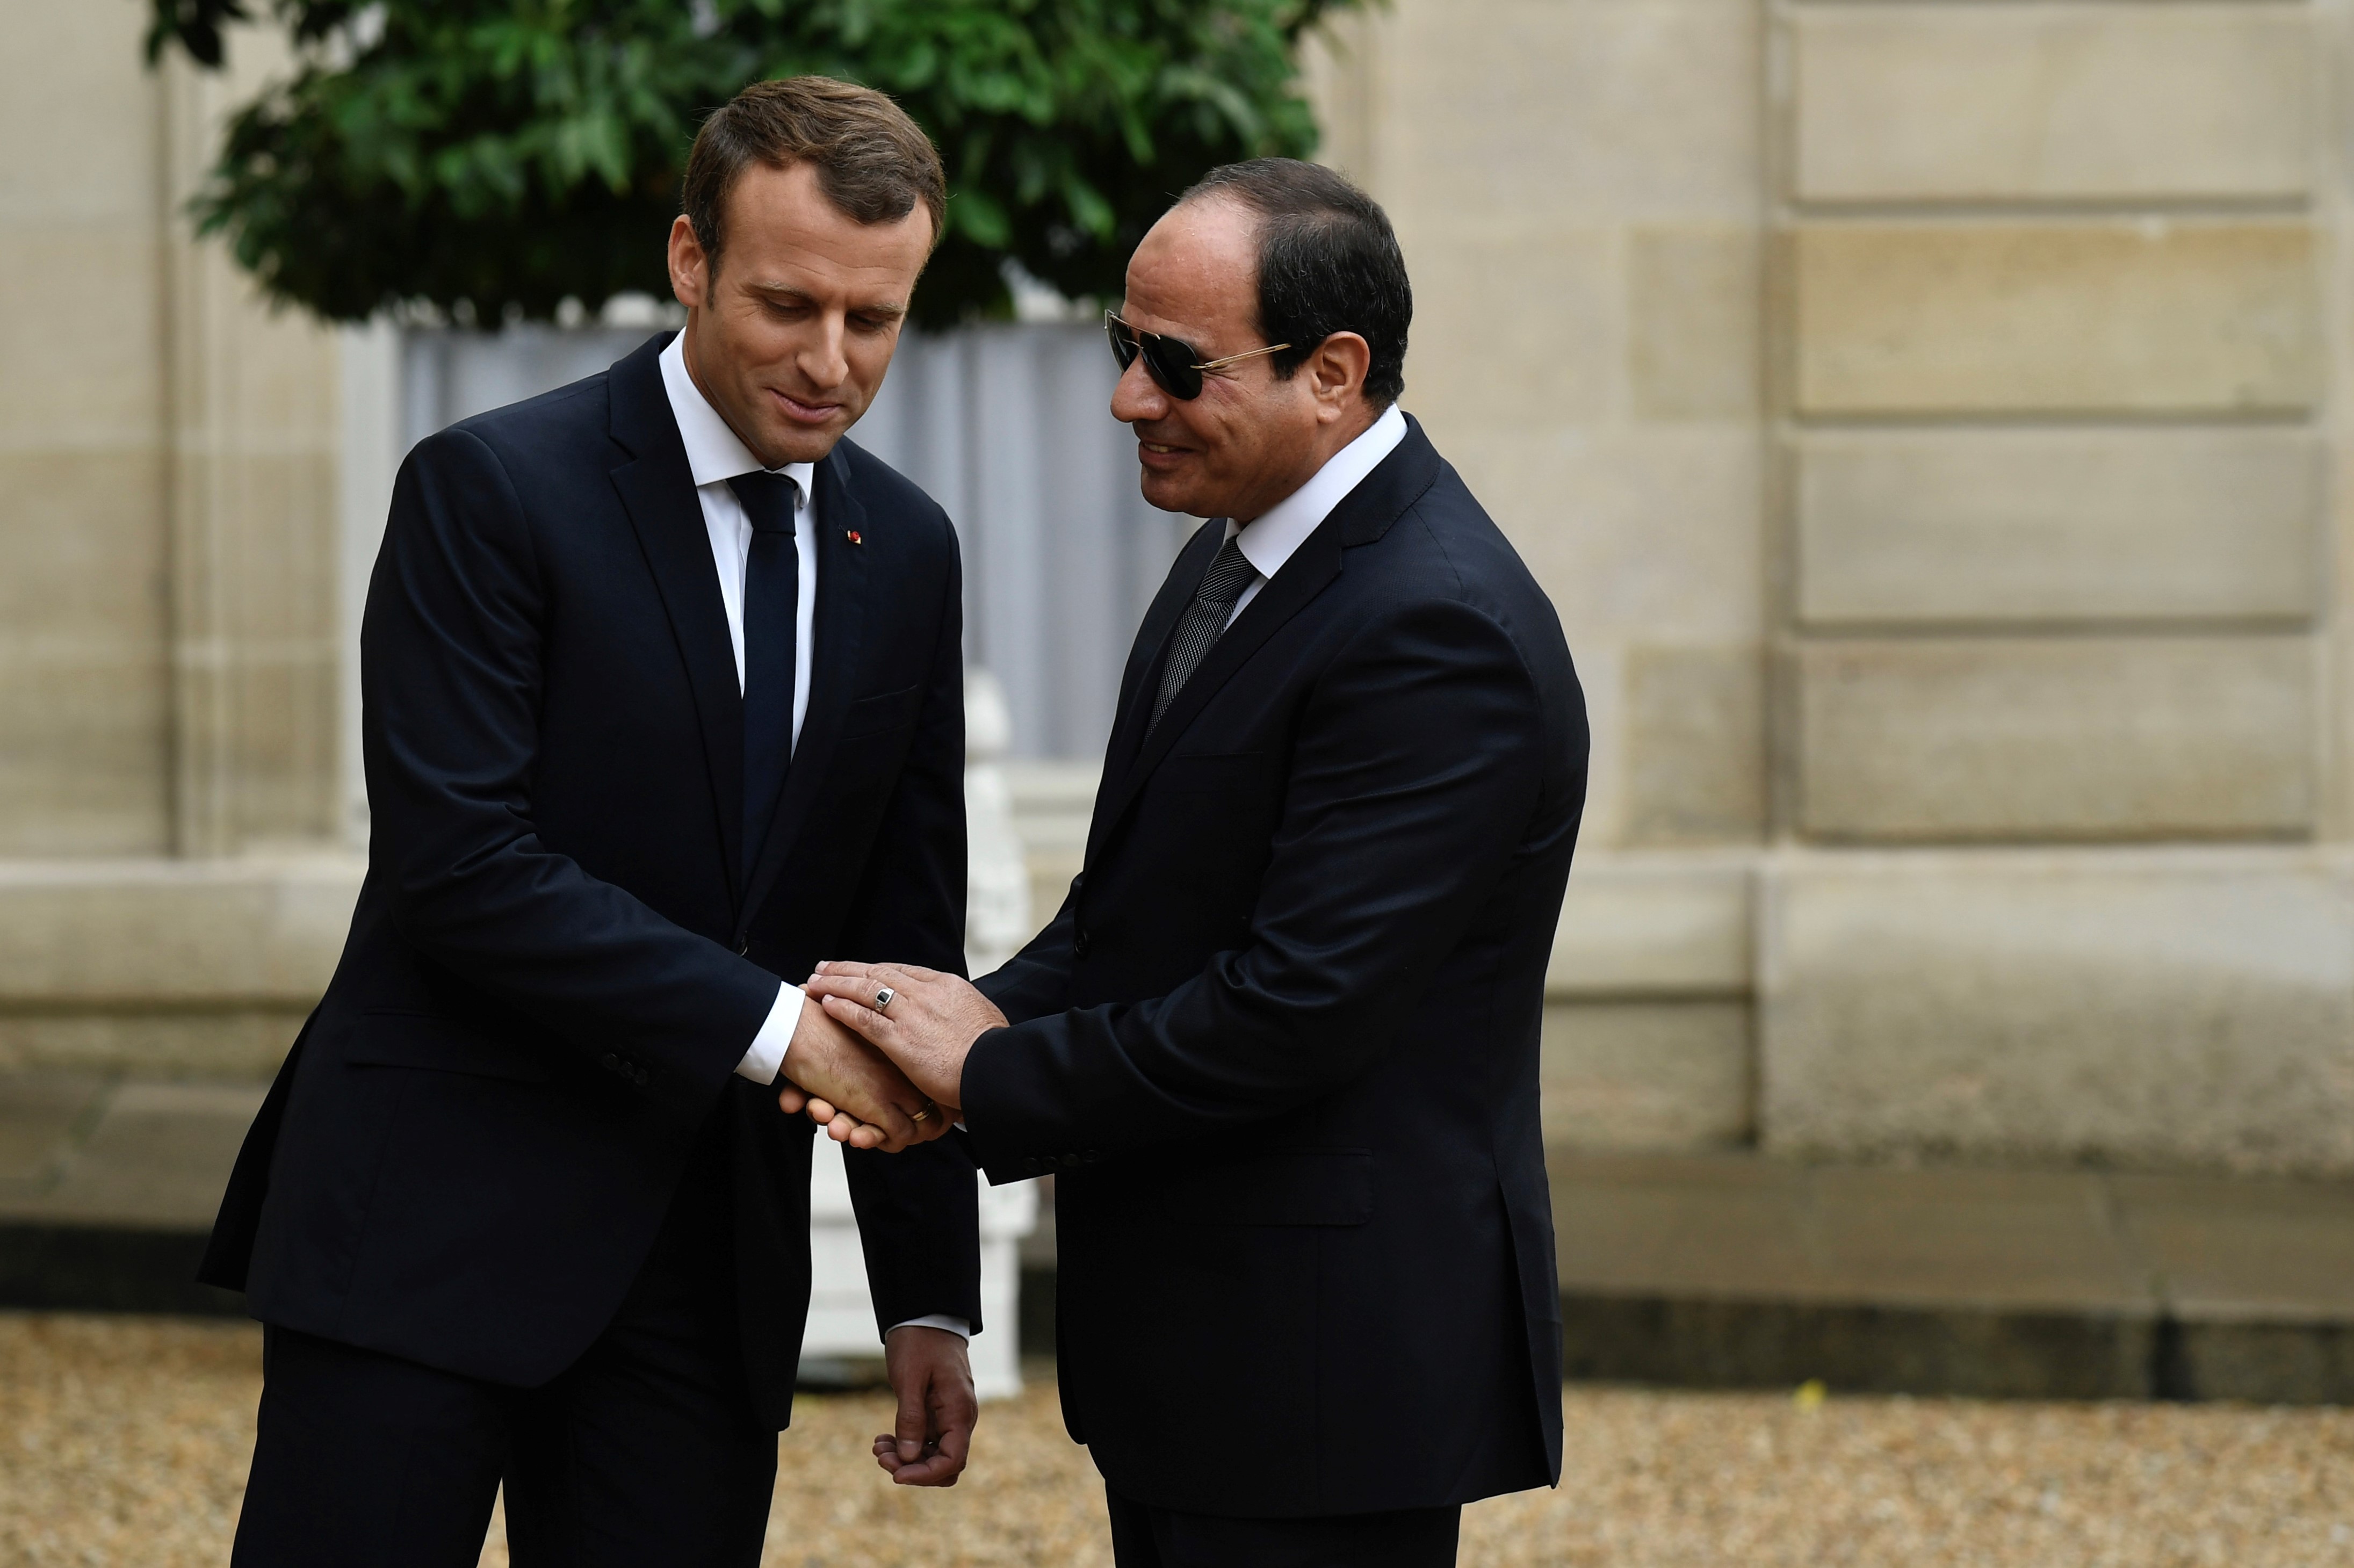 French President Emmanuel Macron (L) shakes hands with Egypt's President Abdel Fattah al-Sisi upon his arrival ahead of talks at the Elysee Palace in Paris, on 24 October, 2017 (AFP)